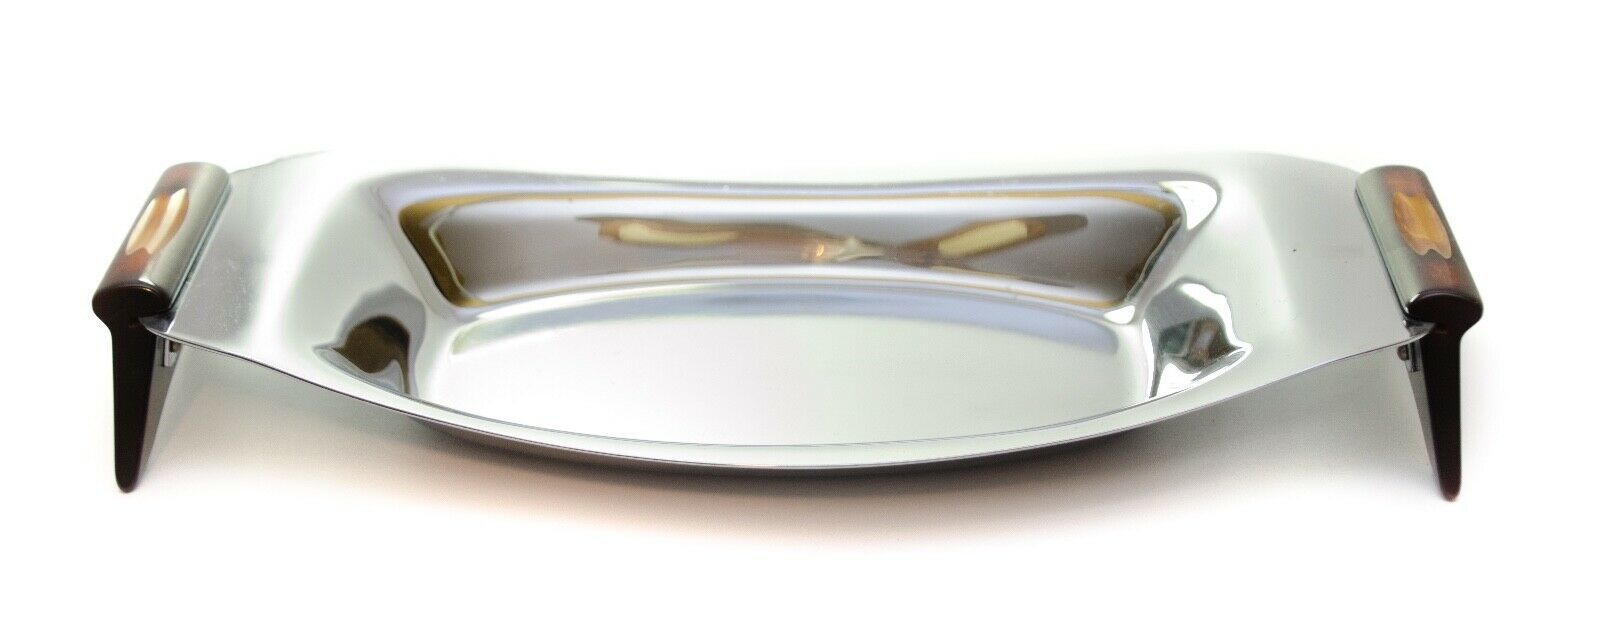 Primary image for Vintage Glo-Hill Serving Tray Oval Gourmet Canada Red & Caramel Bakelite Handles